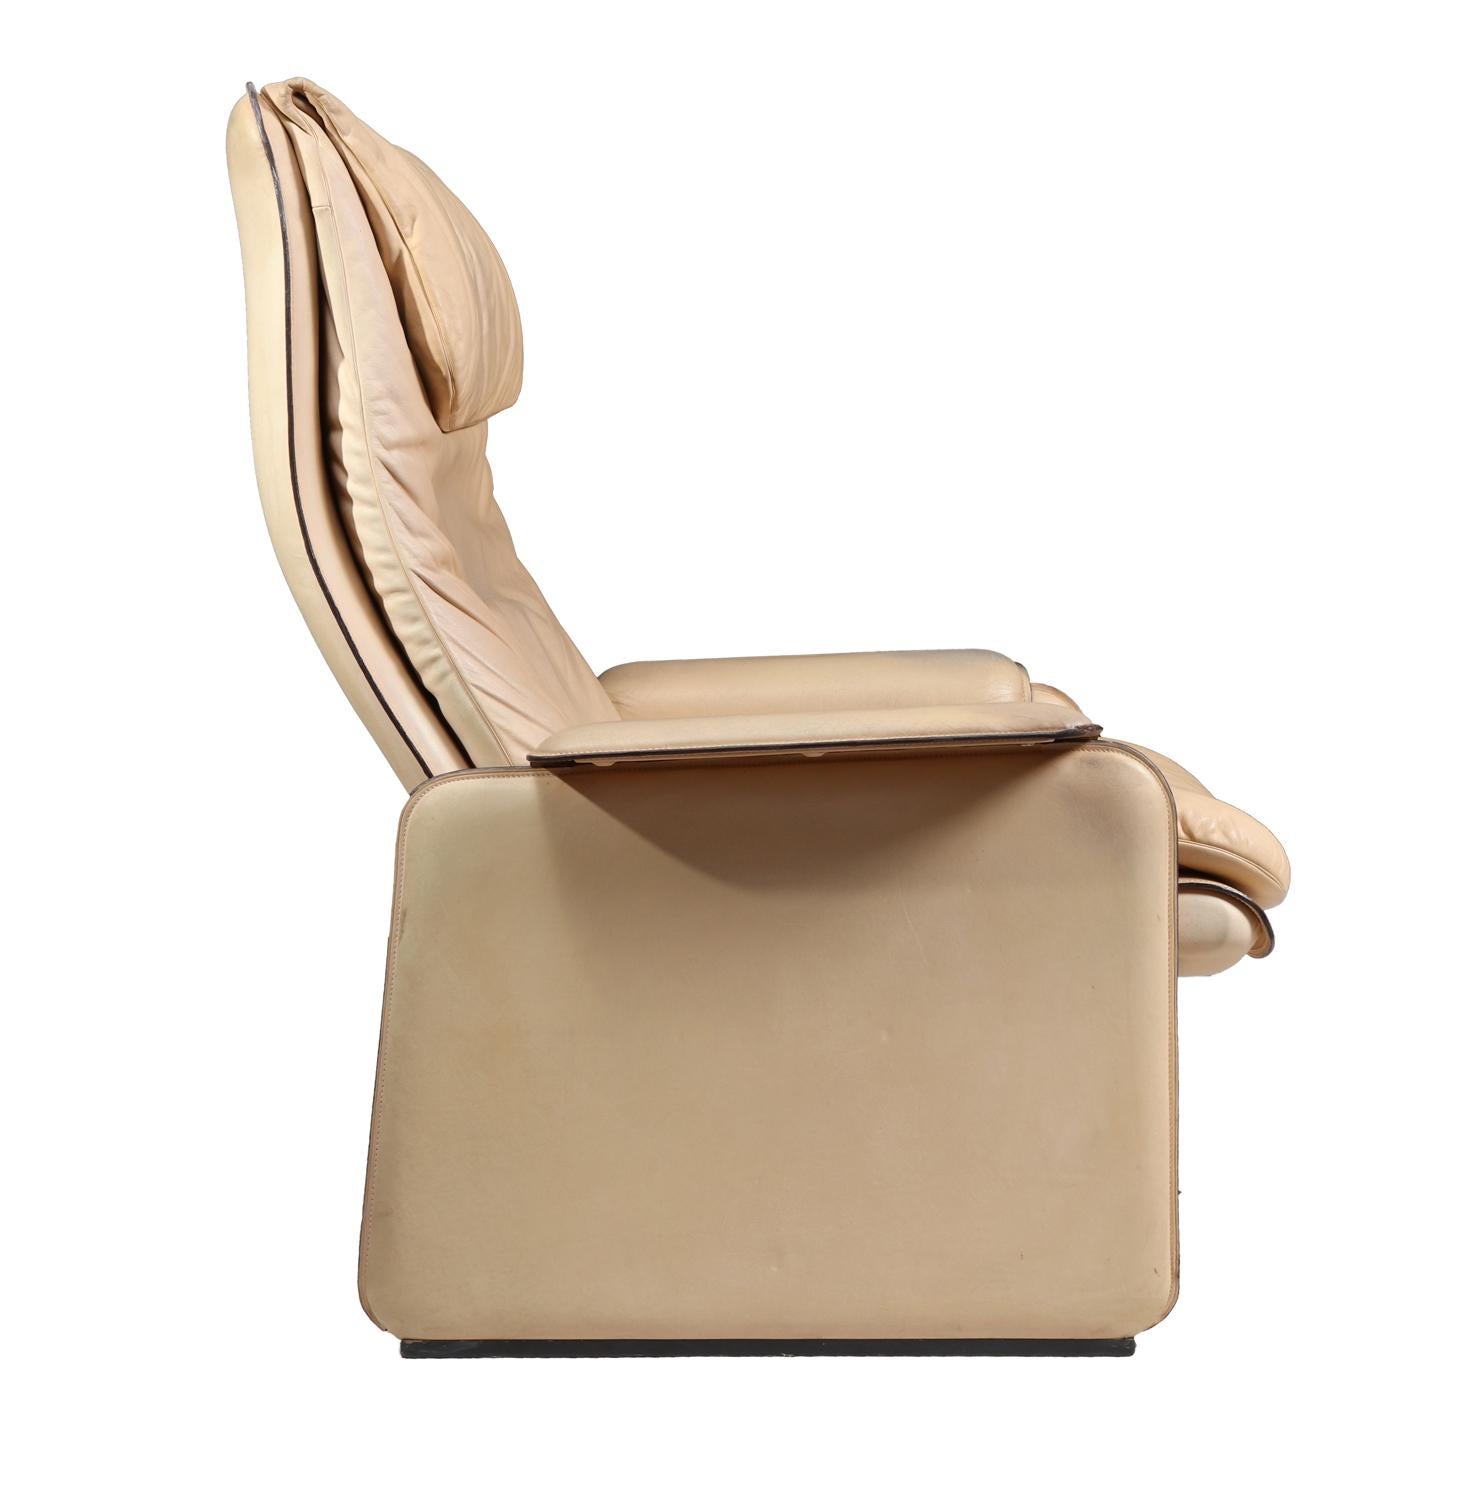 Leather armchair by De Sede, circa 1980
A cream leather reclining armchair designed and produced by De Sede in Switzerland in the 1980s, the chair has general wear and a few age related marks the mechanism works well and is in good condition